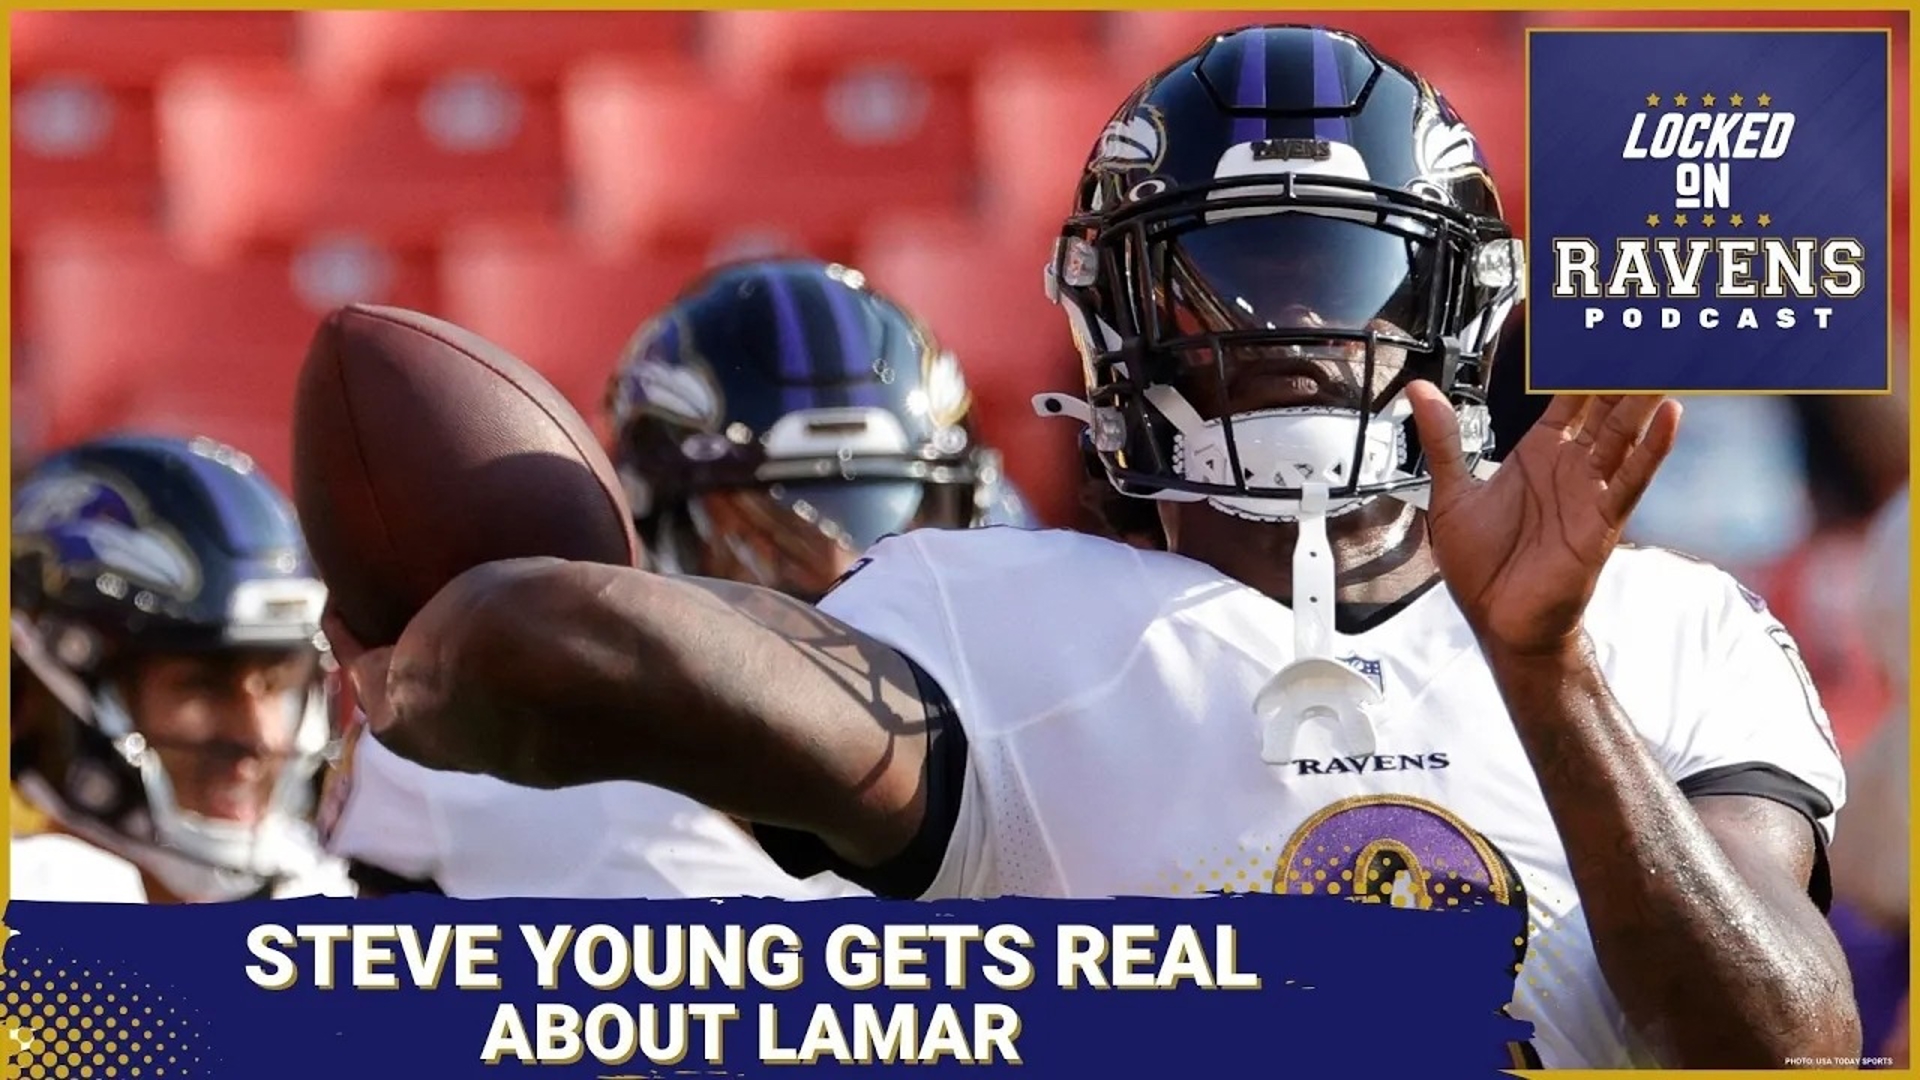 We look at what Hall of Fame quarterback Steve Young had to say about Baltimore Ravens quarterback Lamar Jackson, diving into his comments and more.